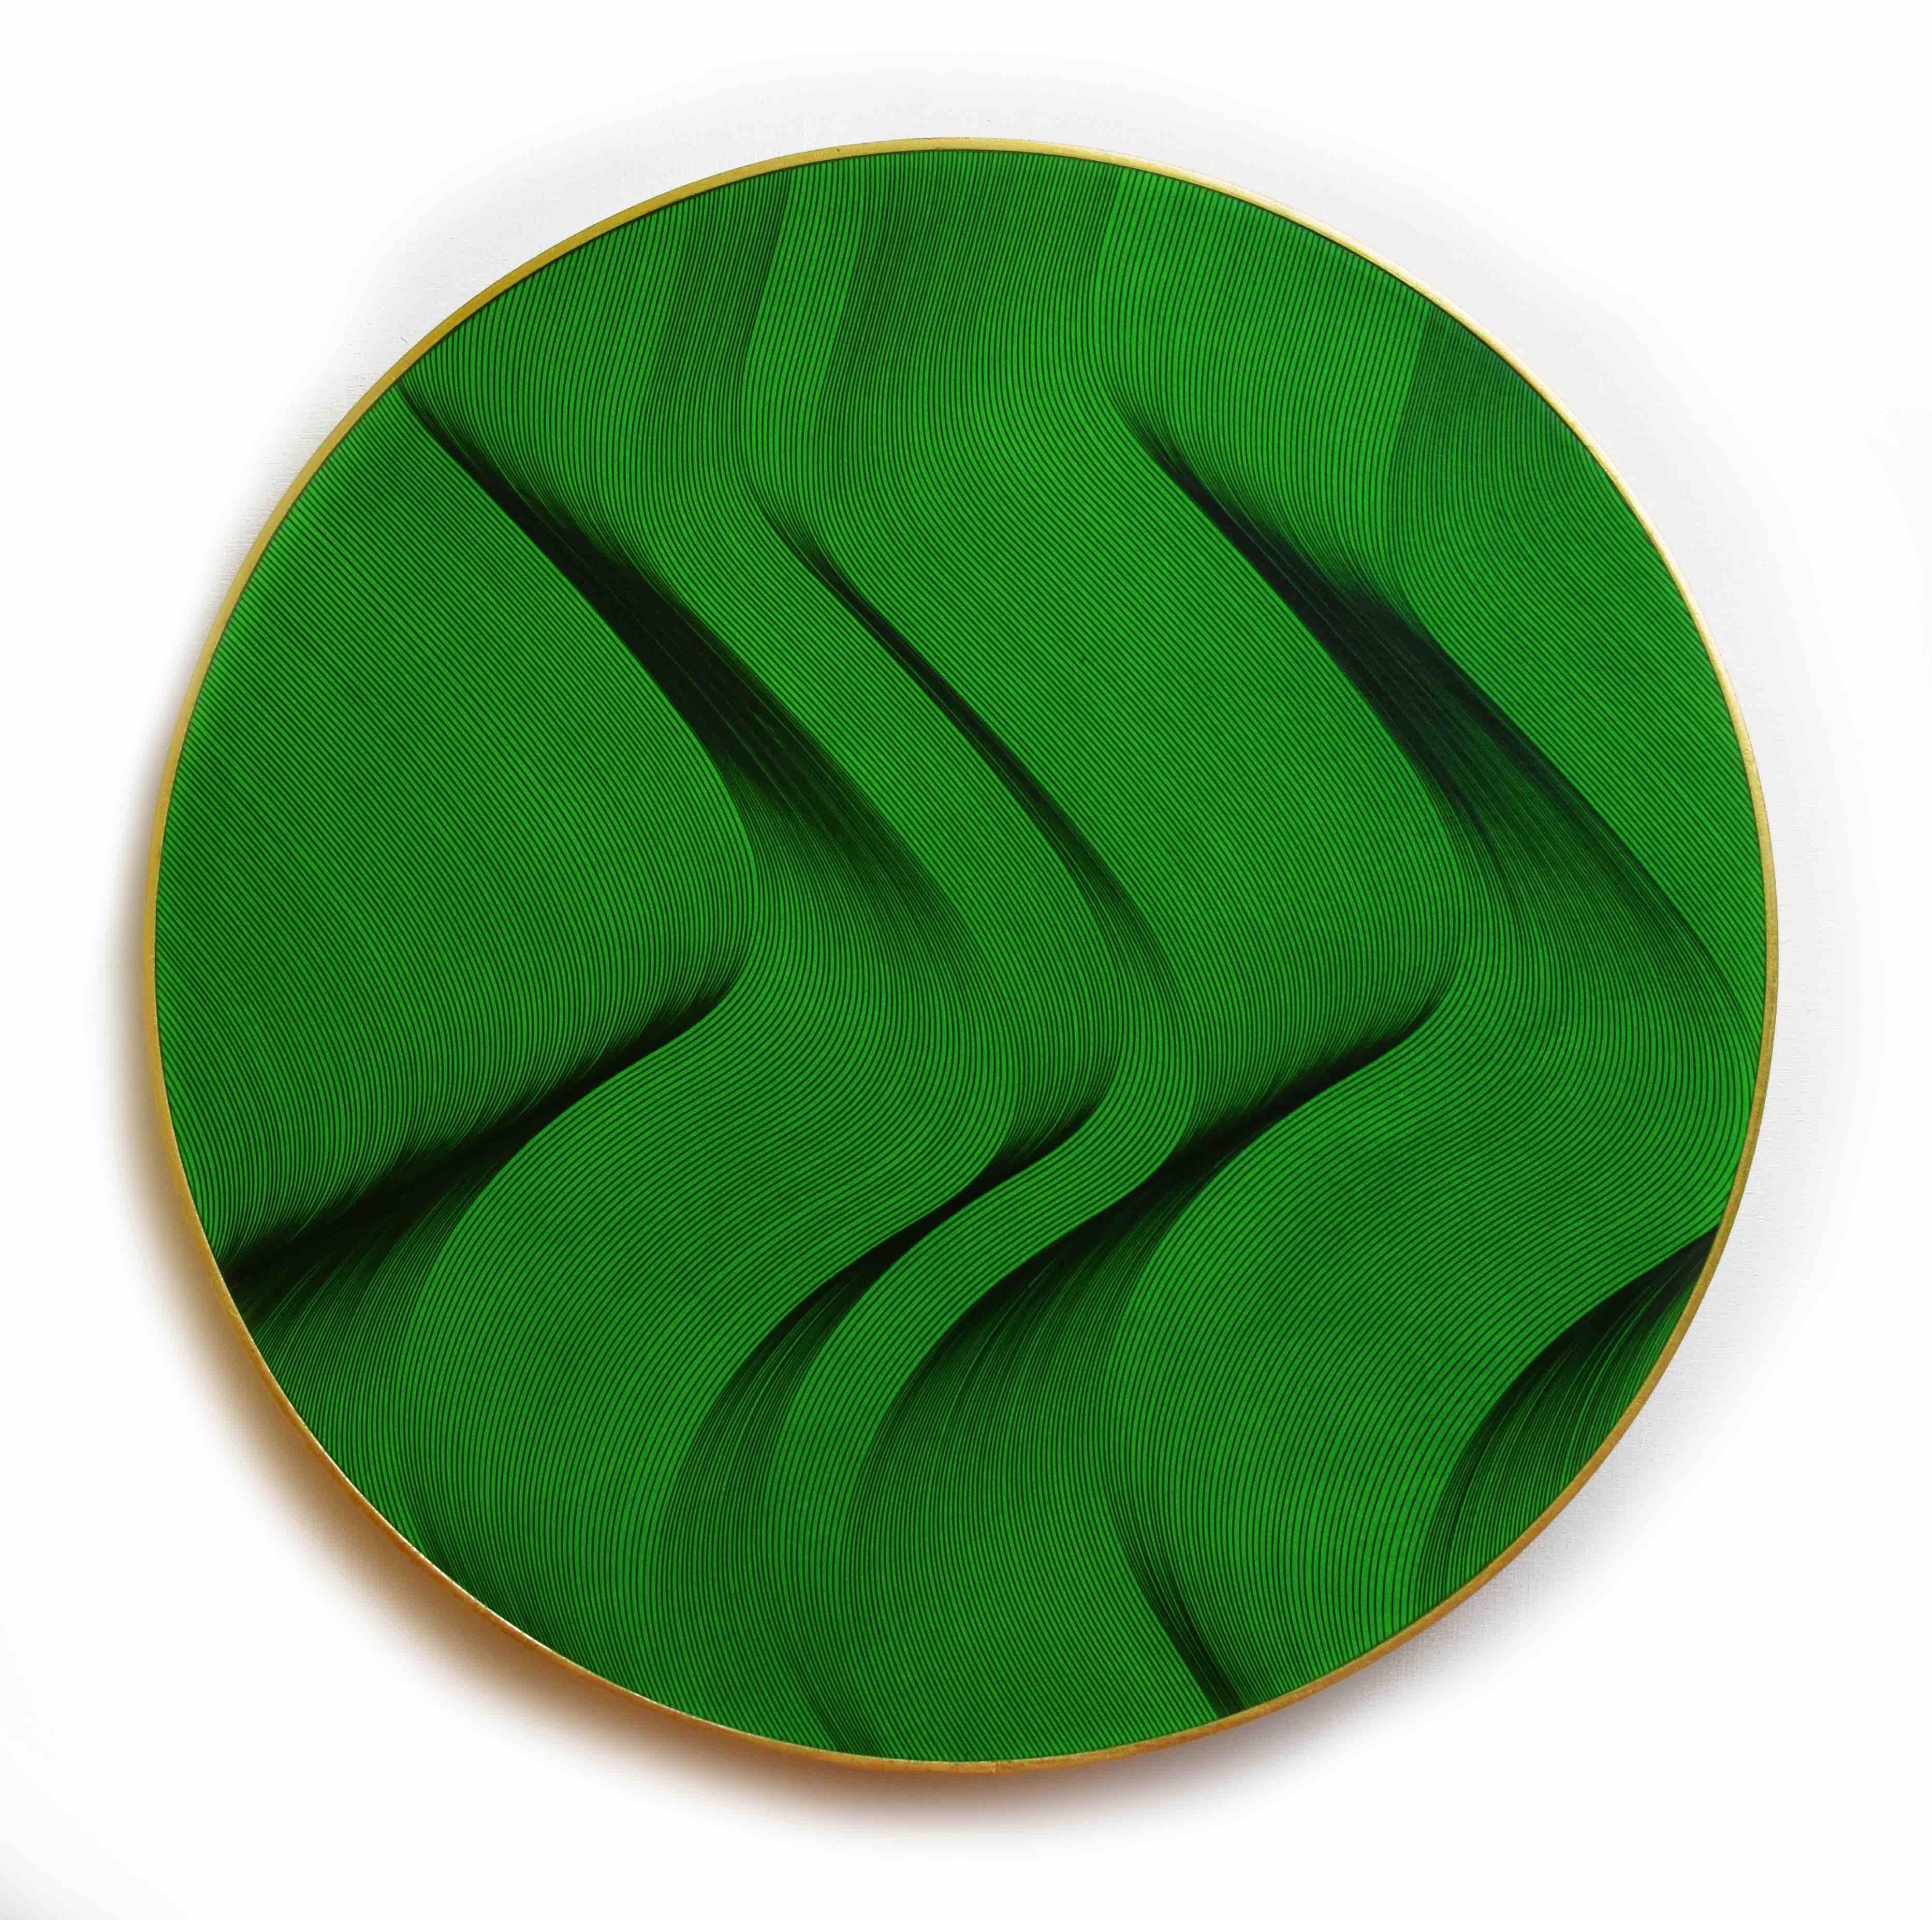 Green waves 2021 - geometric abstract painting - Painting by Roberto Lucchetta